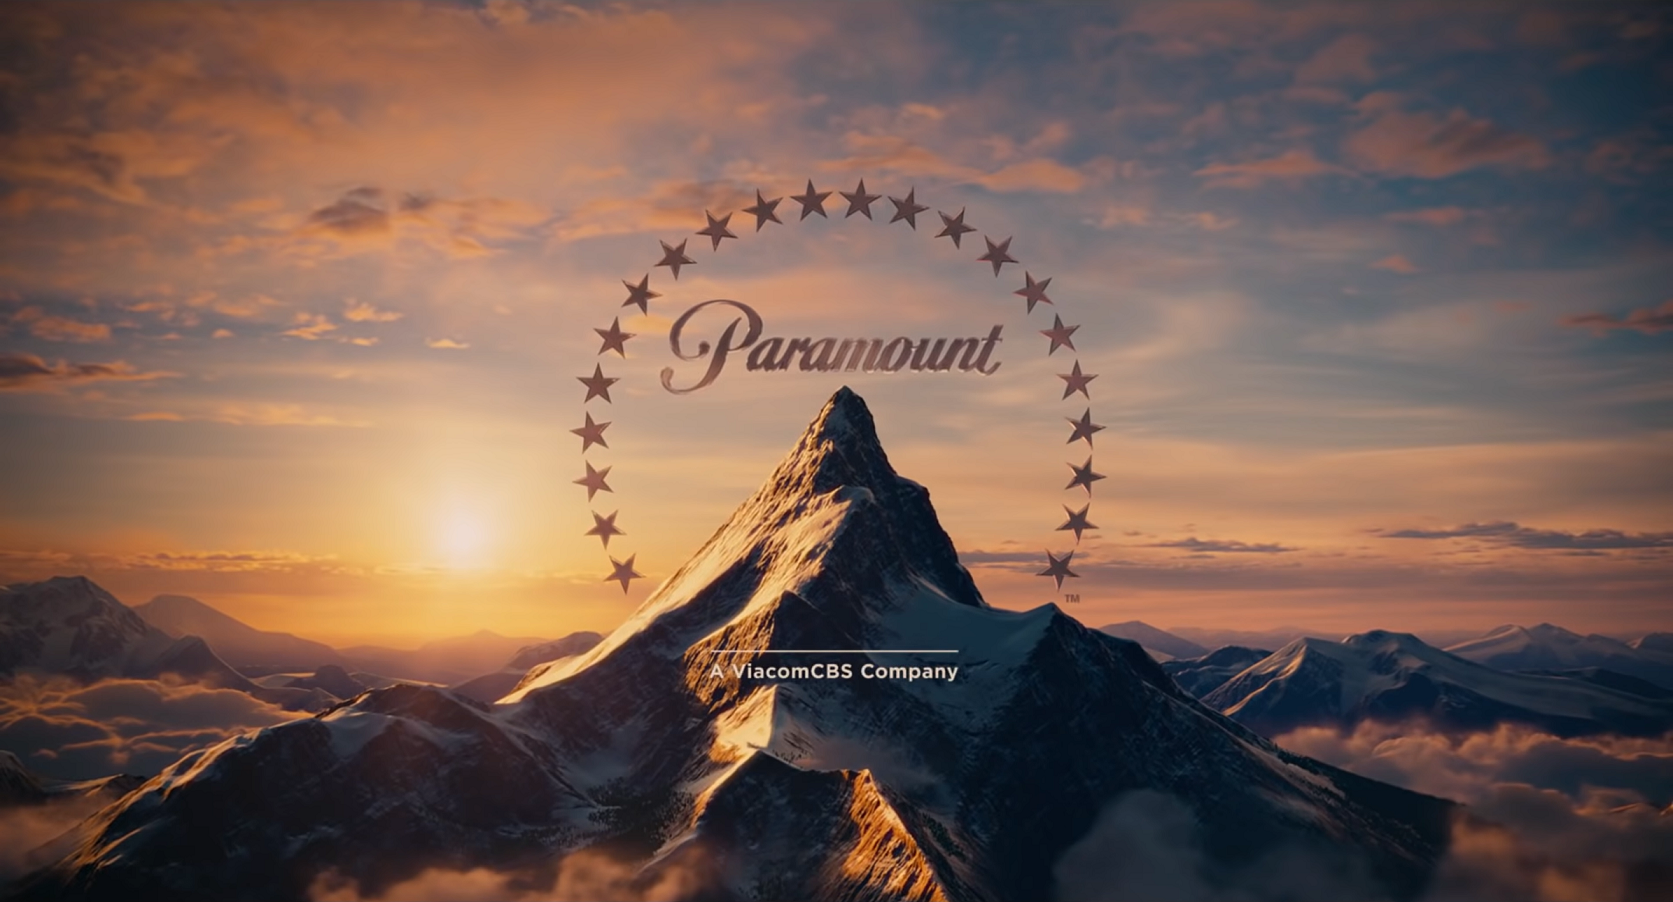 Paramount Pictures (2020, ViacomCBS byline)